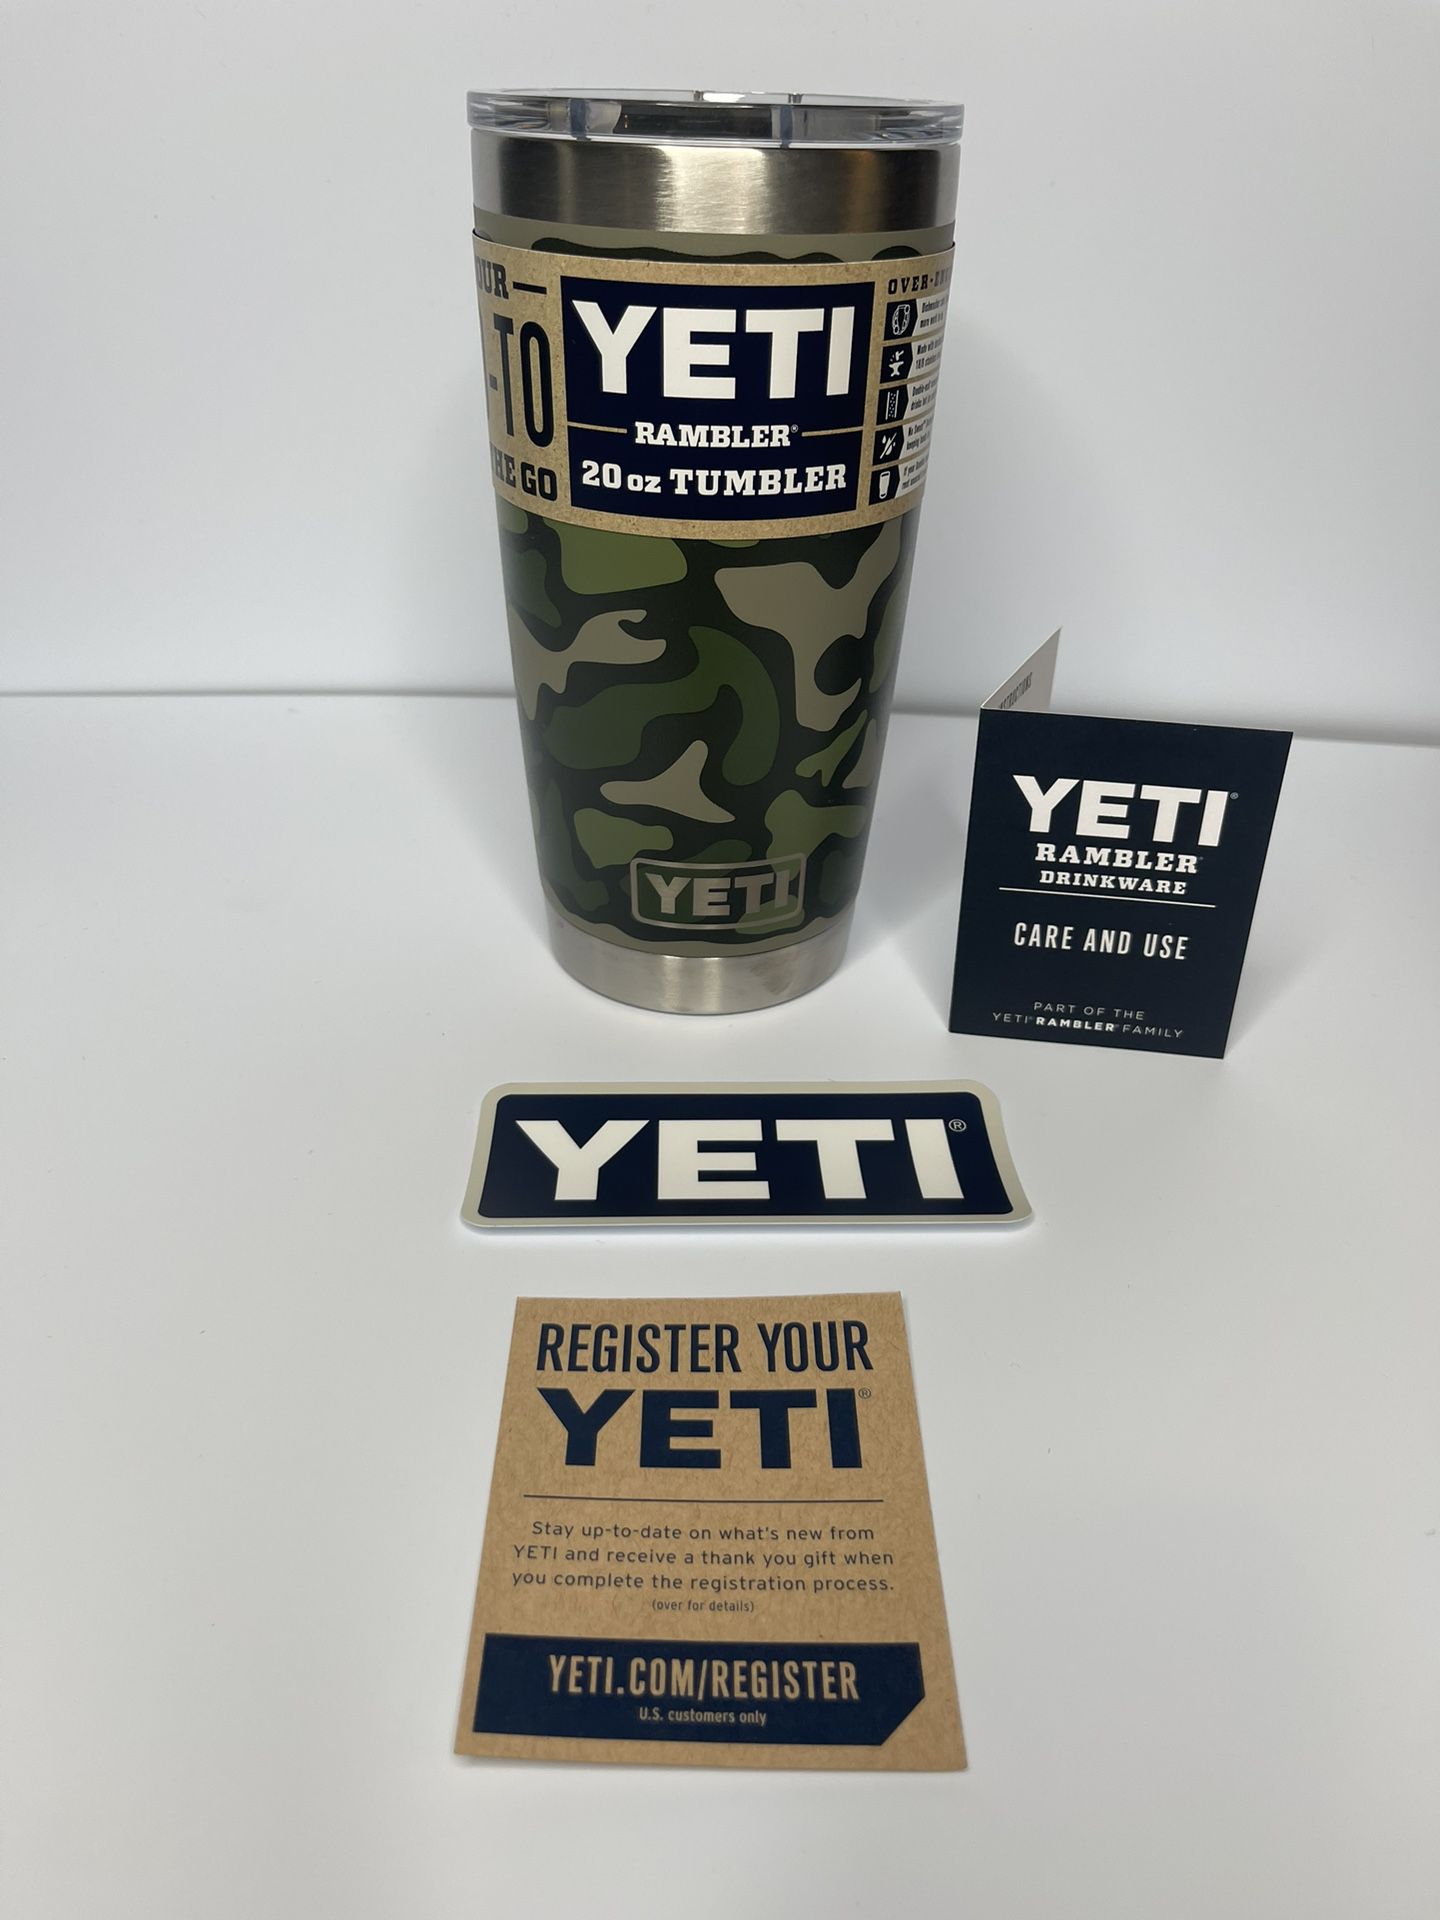 Yeti Rambler 20oz Tumbler - Camo NEW Limited Edition Sold Out for